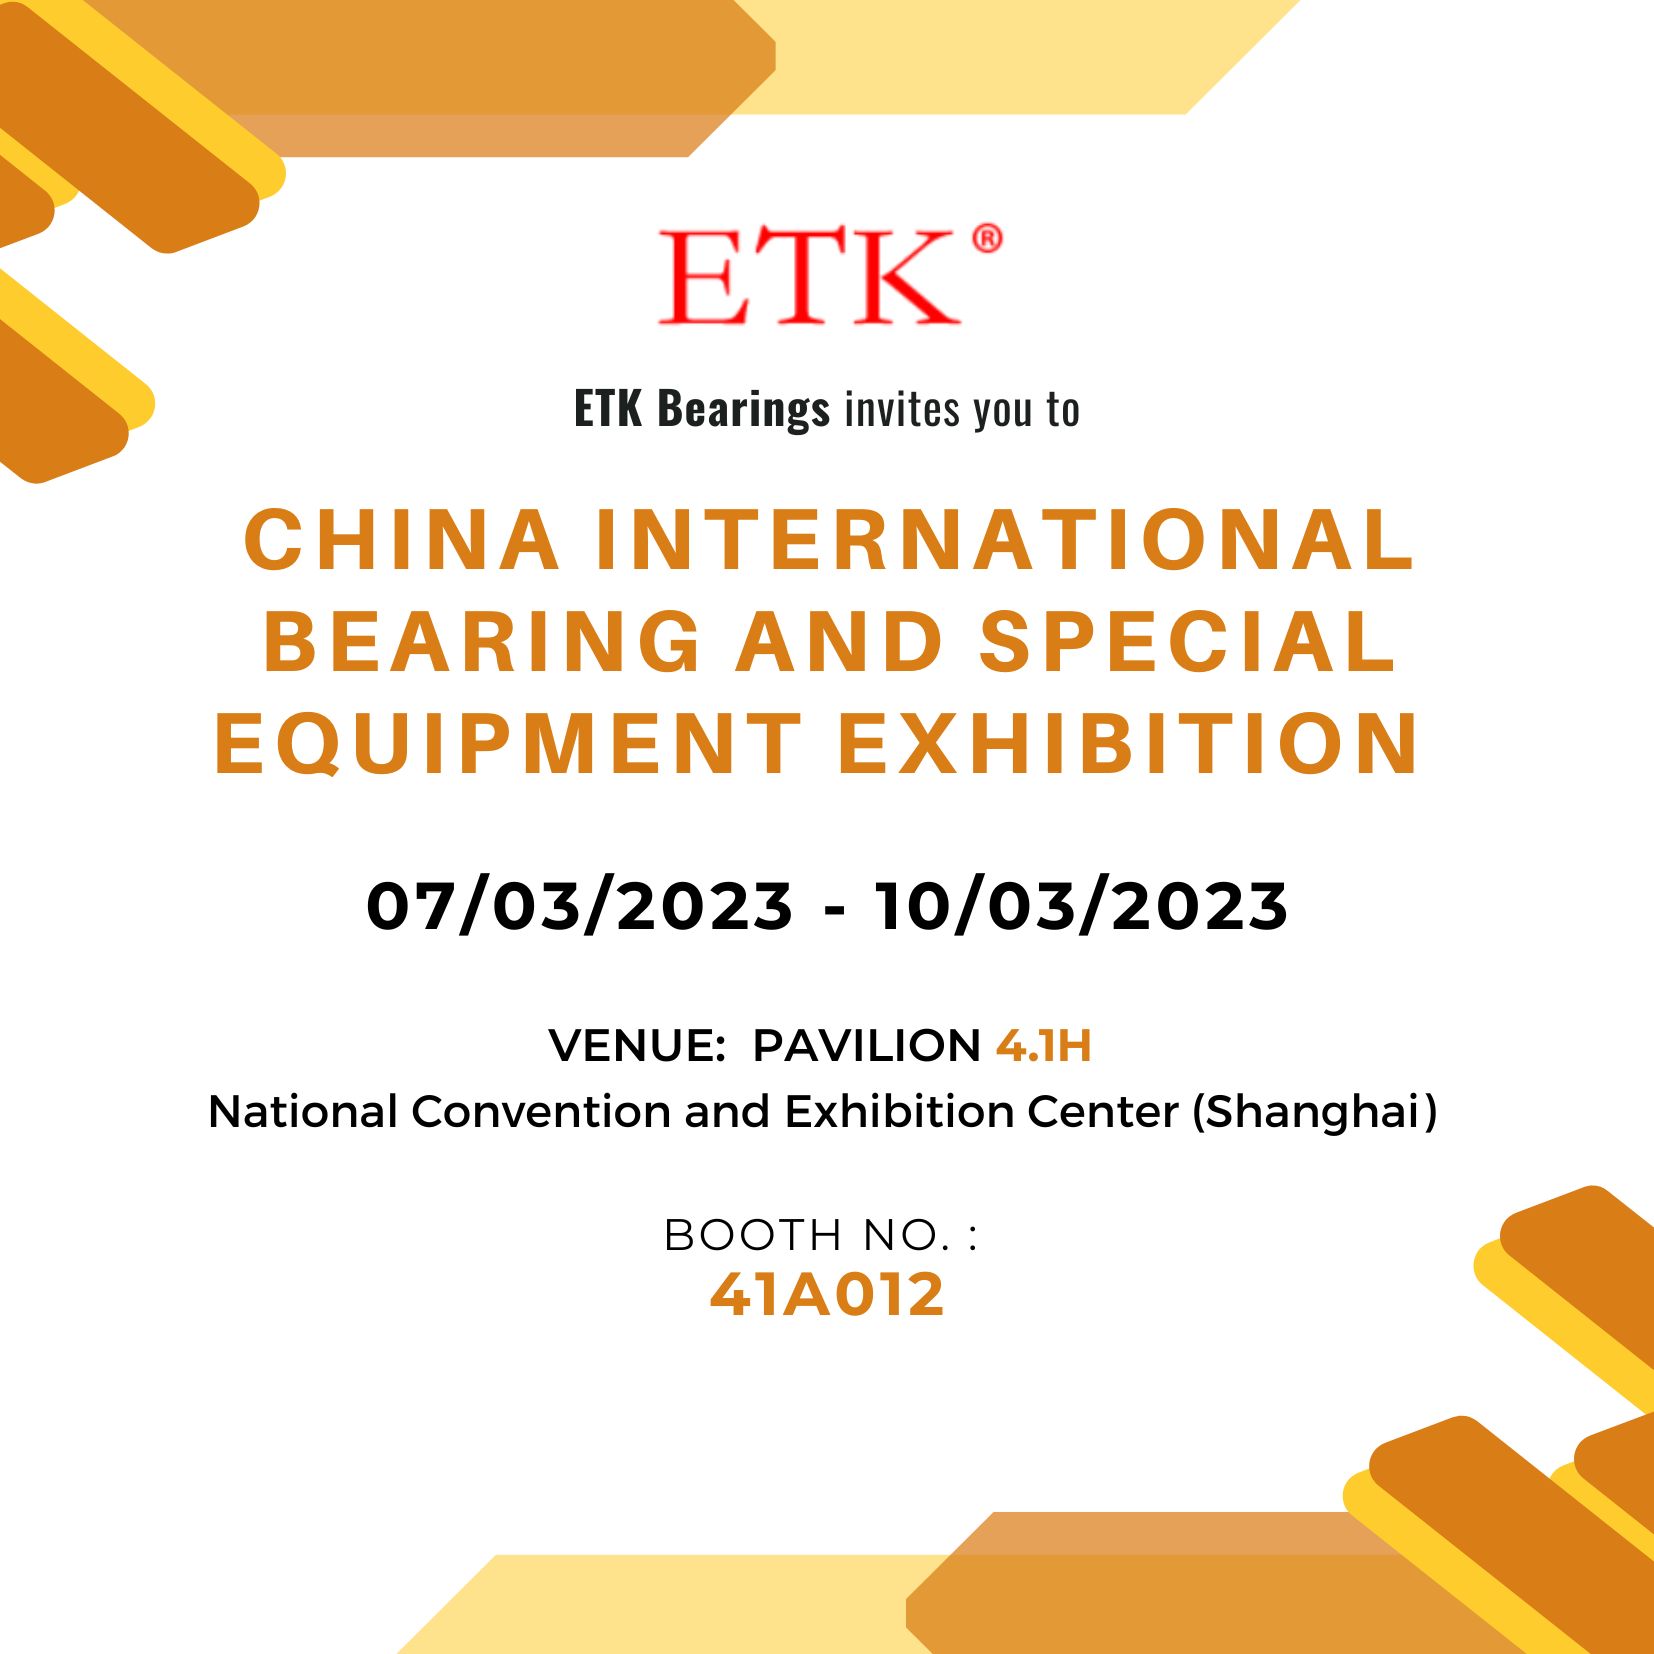 The Invitation to 2023 China International Bearing and Special Equipment Exhibition